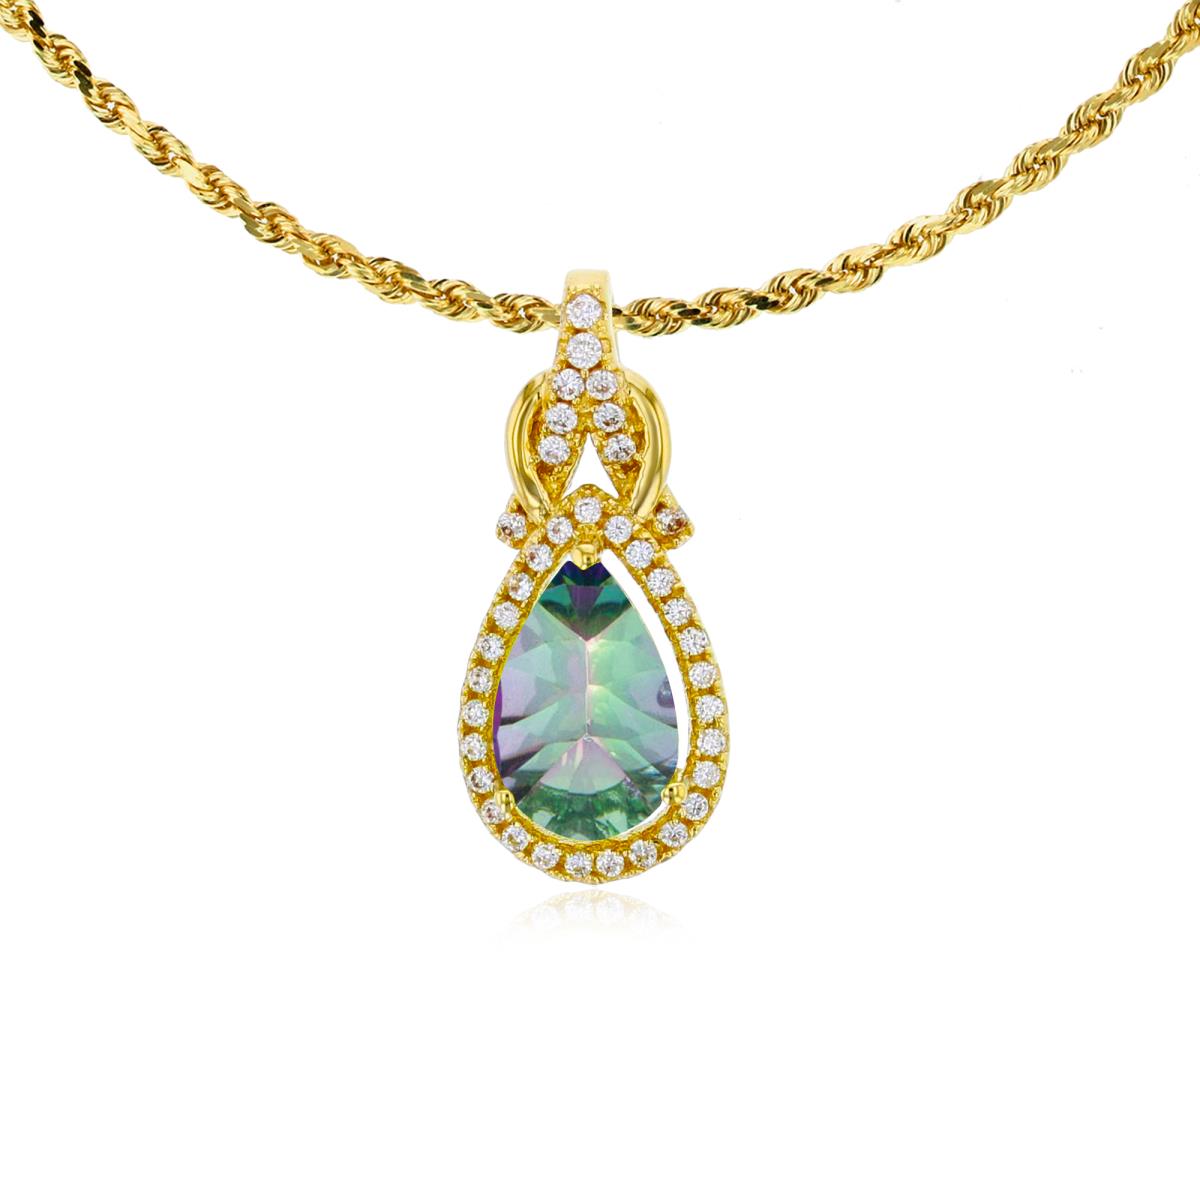 10K Yellow Gold 8x5mm Pear Cut Mystic Green Topaz & 0.11 CTTW Rnd Diamond Knot 18" Rope Chain Necklace